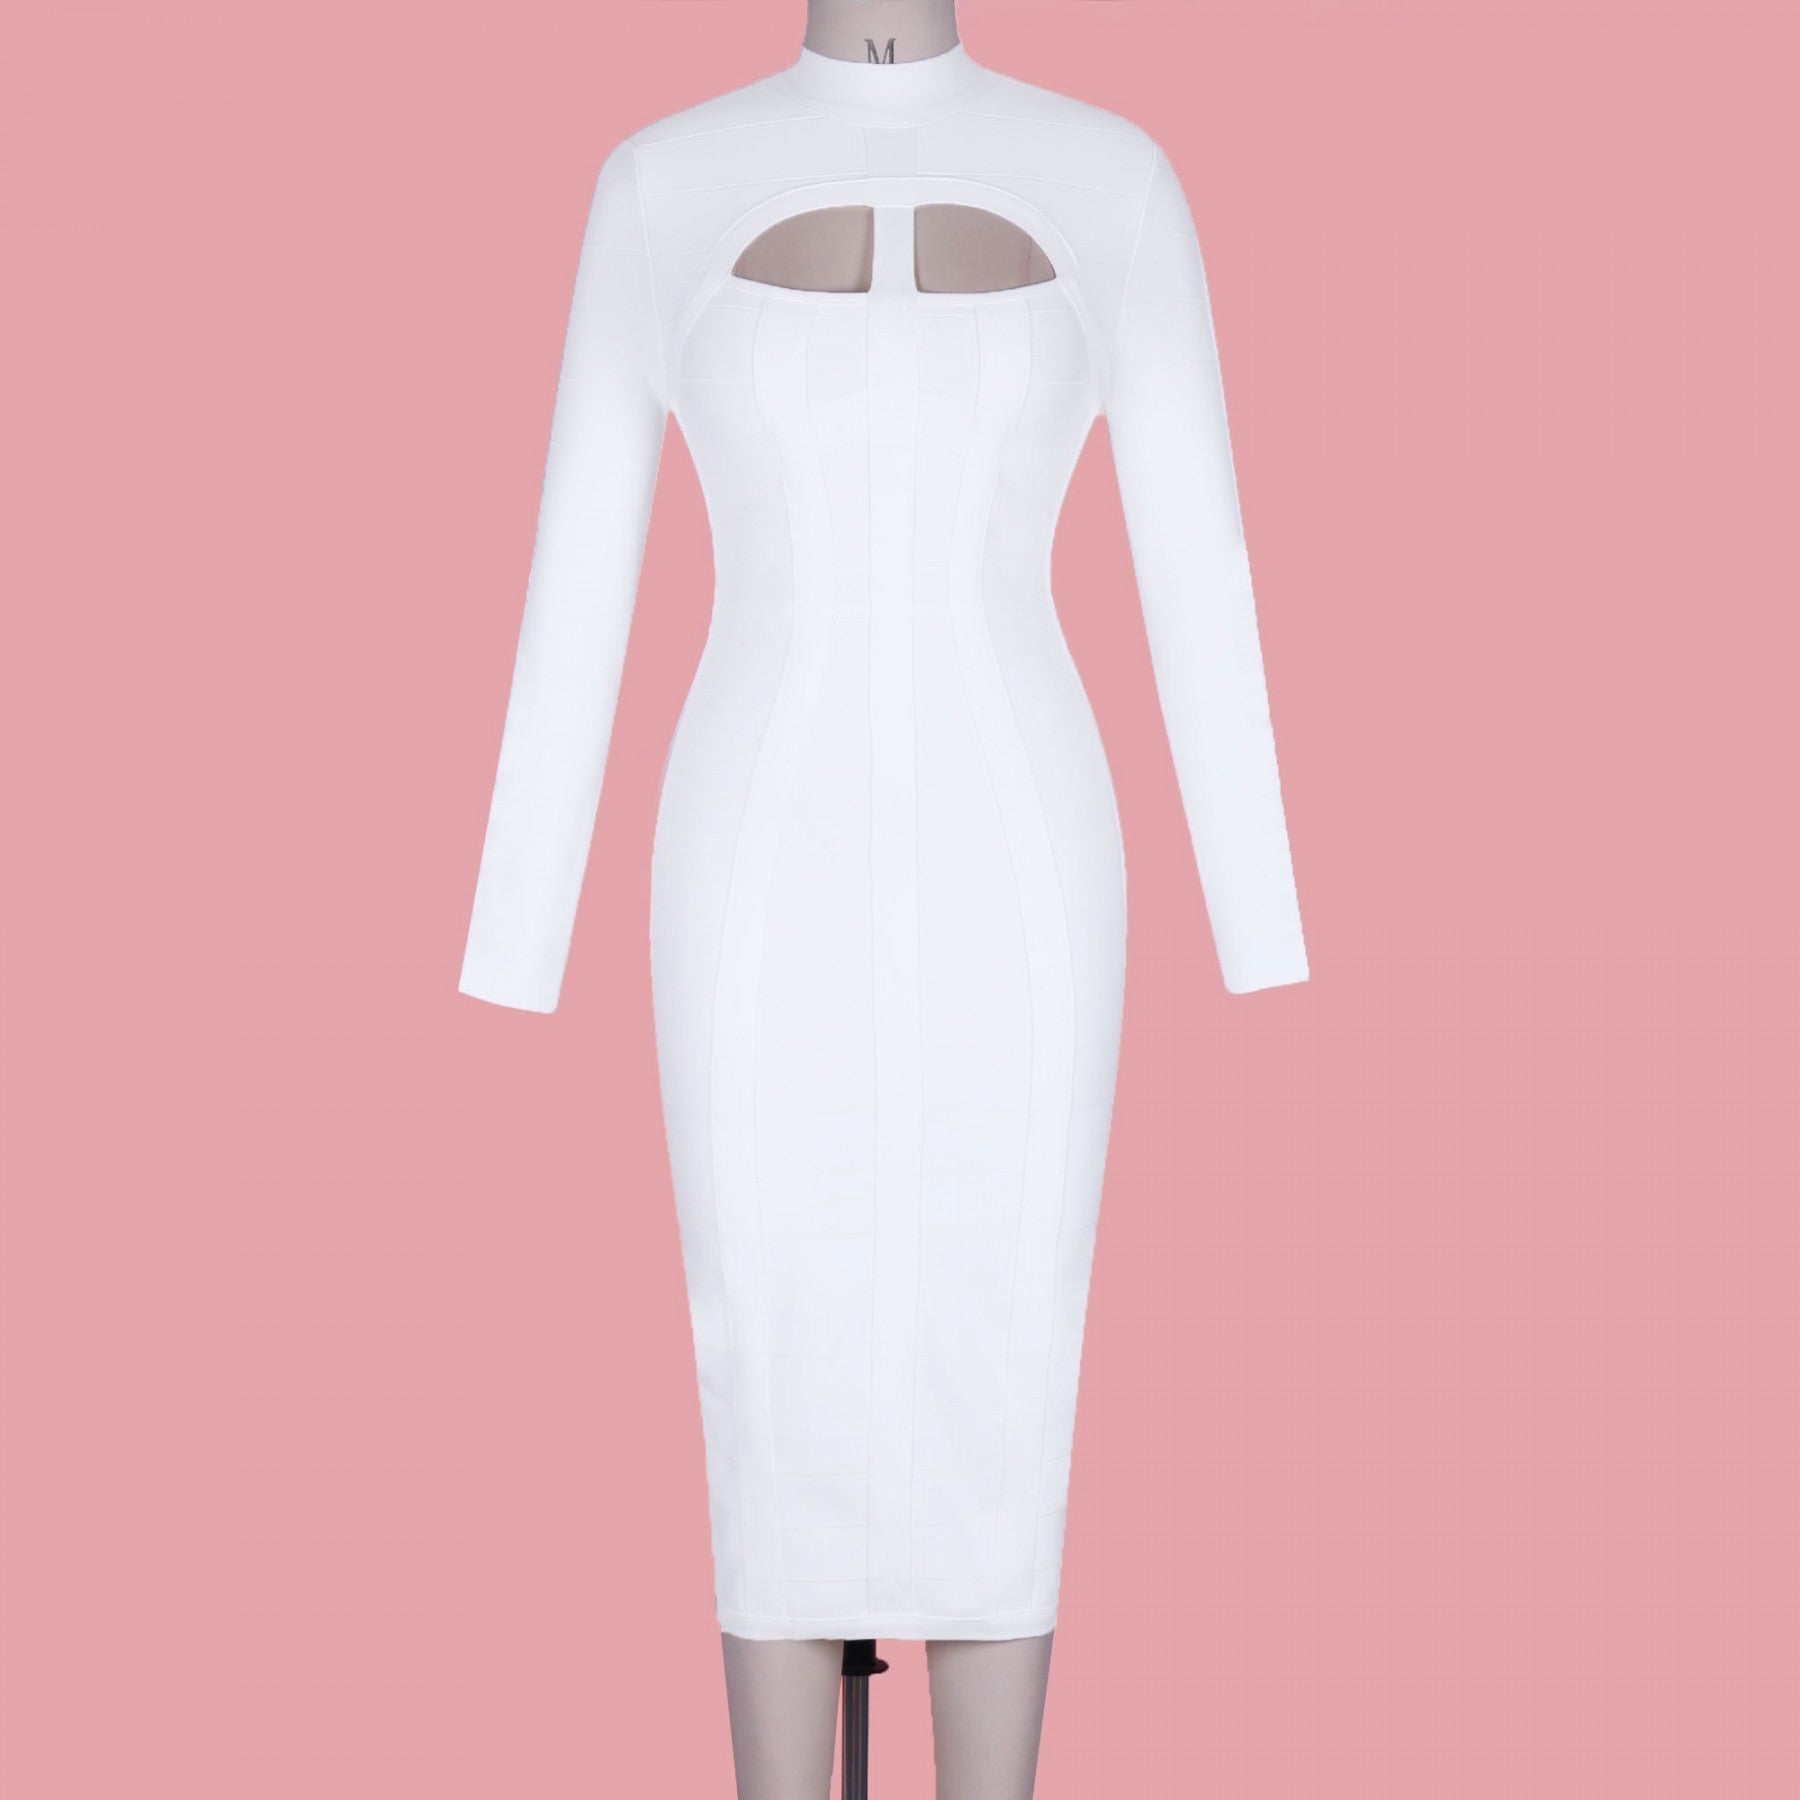 High Neck Long Sleeve Cut Out Over Knee Bandage Dress PP1103 14 in wolddress